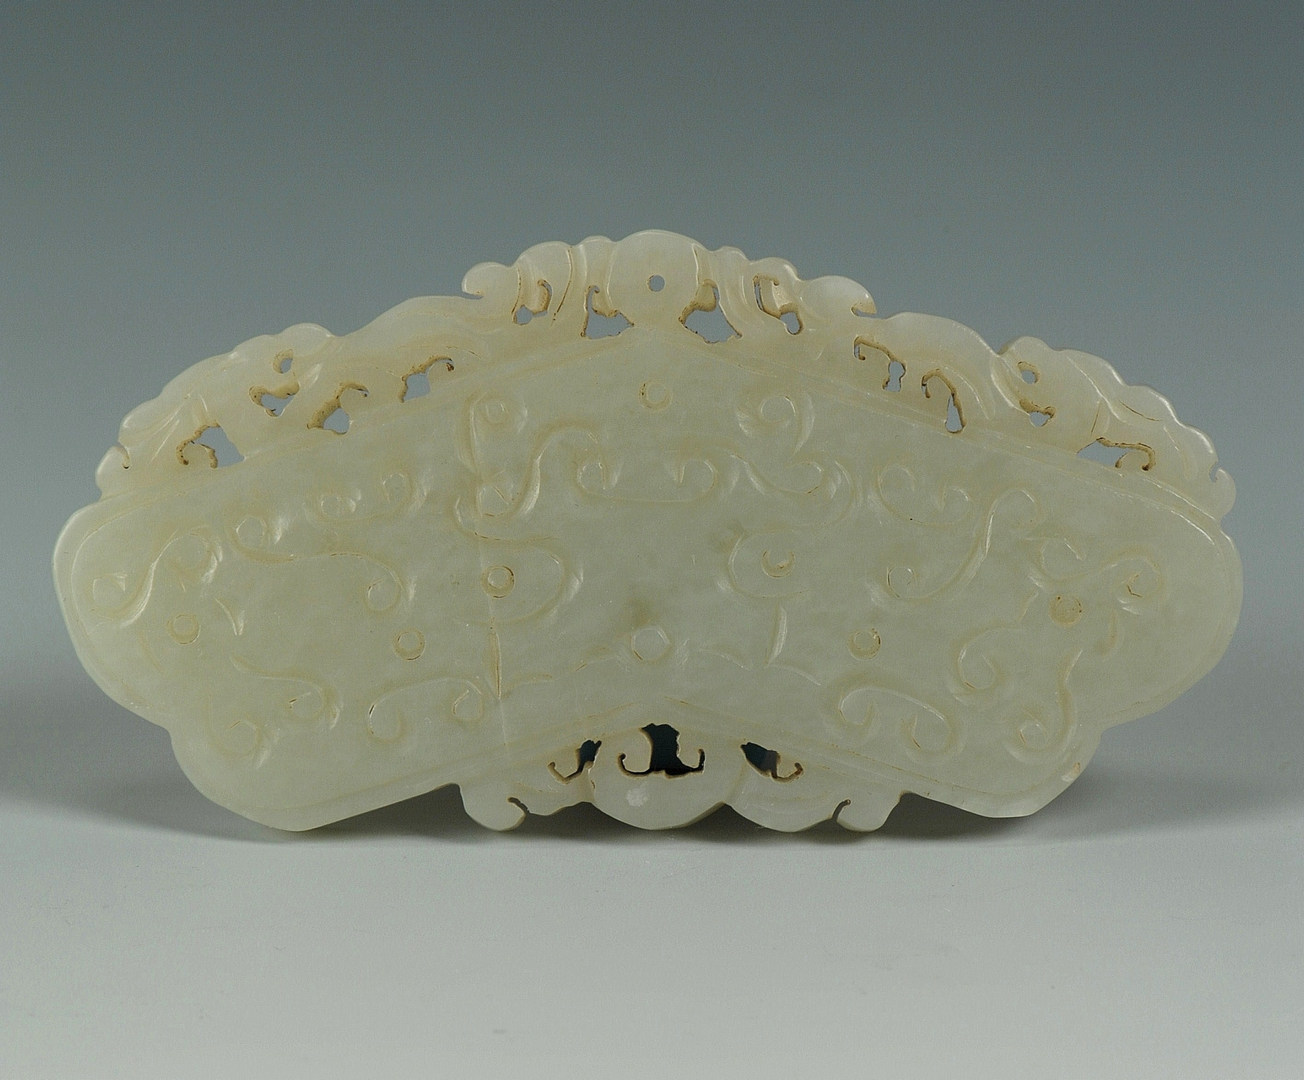 Lot 183: Chinese Carved Celadon Jade Plaque